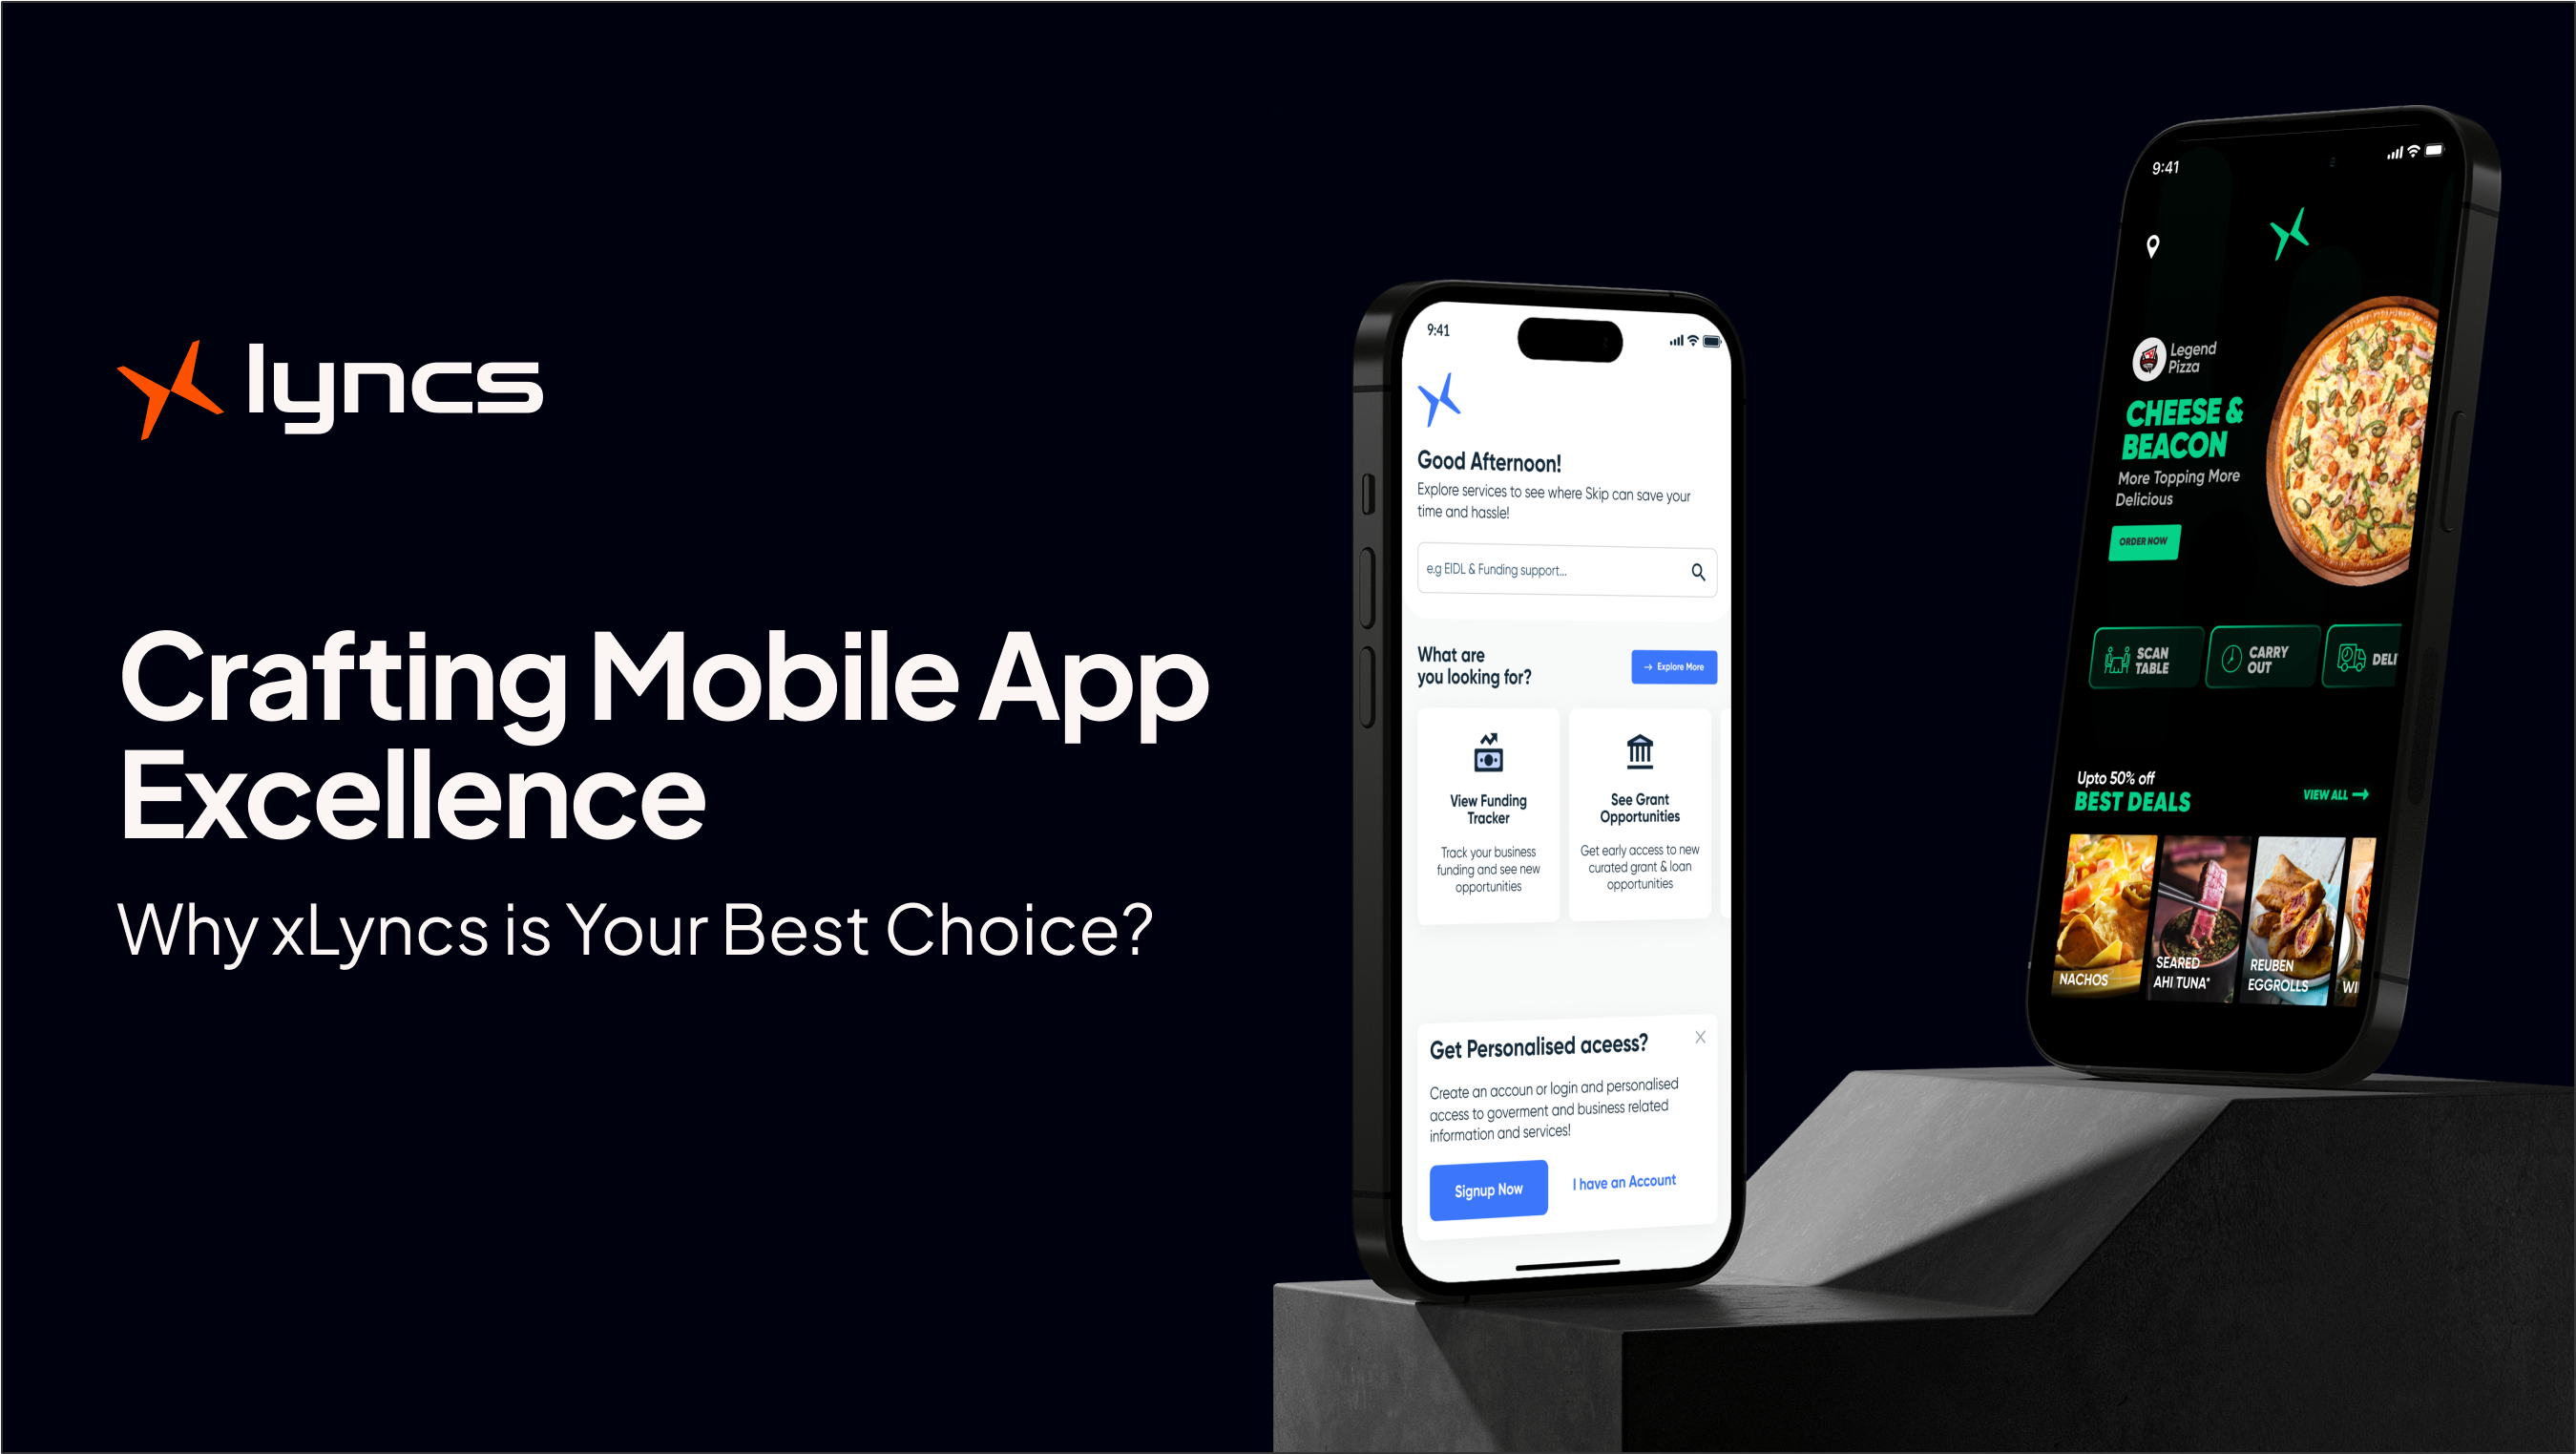 Crafting Mobile App Excellence: Why #xLyncs is Your Best Choice